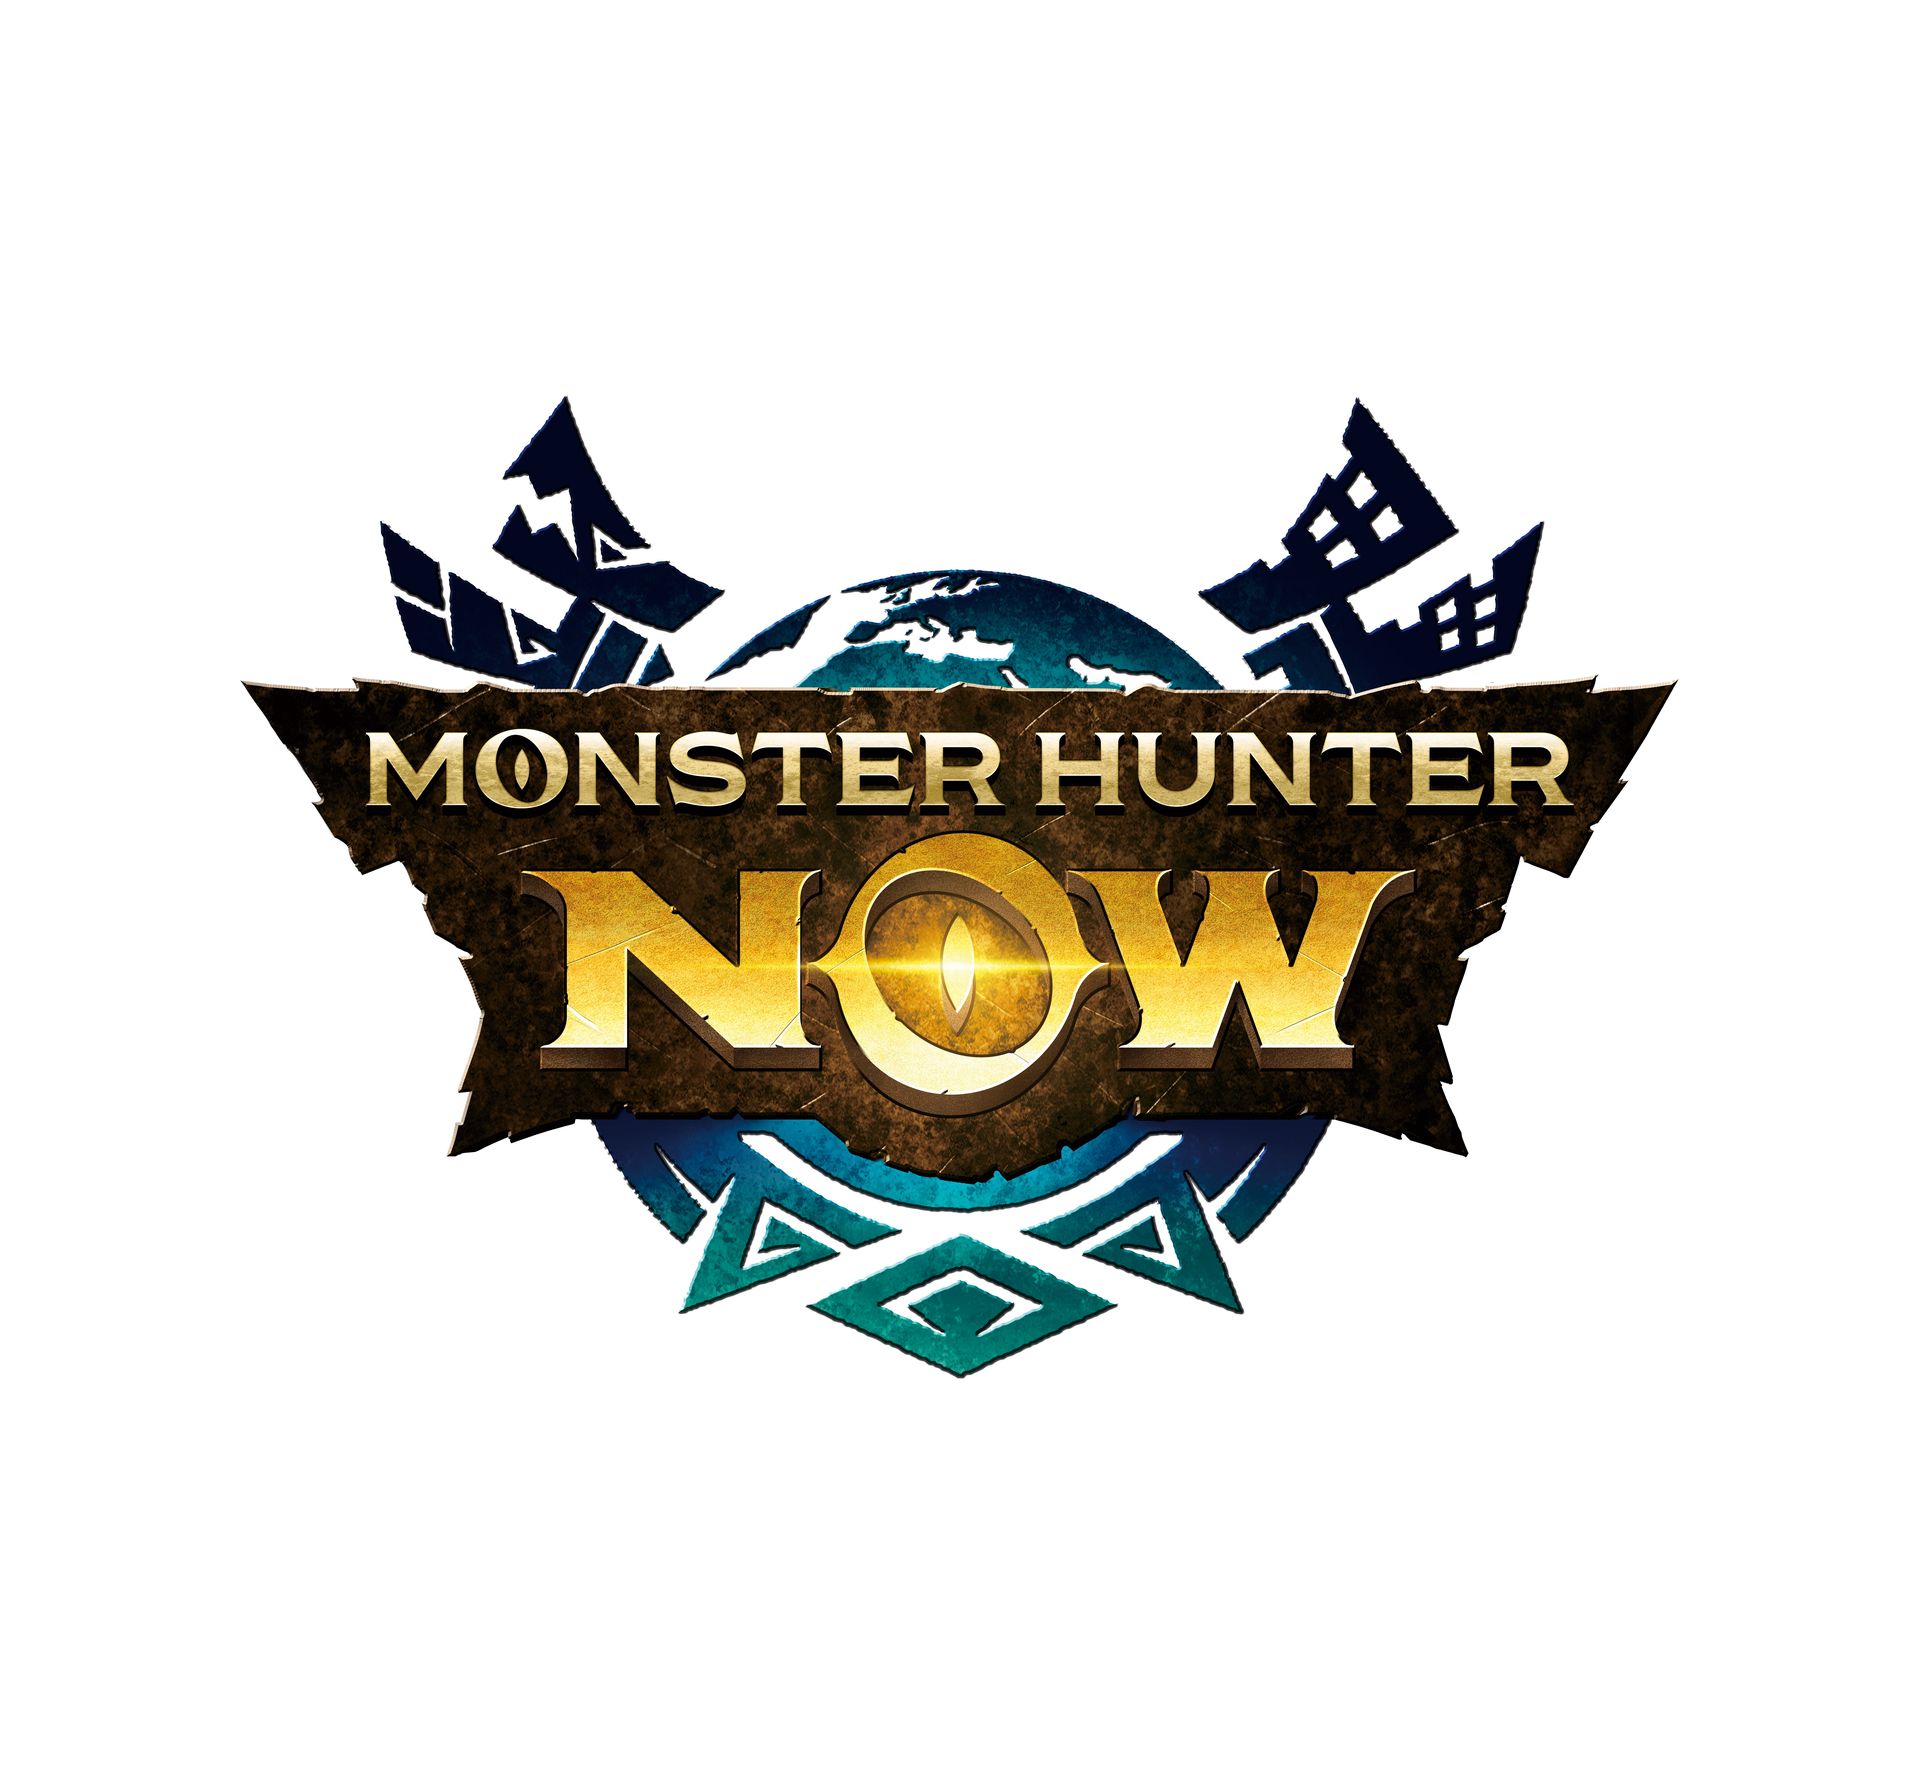 「Monster Hunter Now」配信日が9月14日に決定！ 事前登録受付